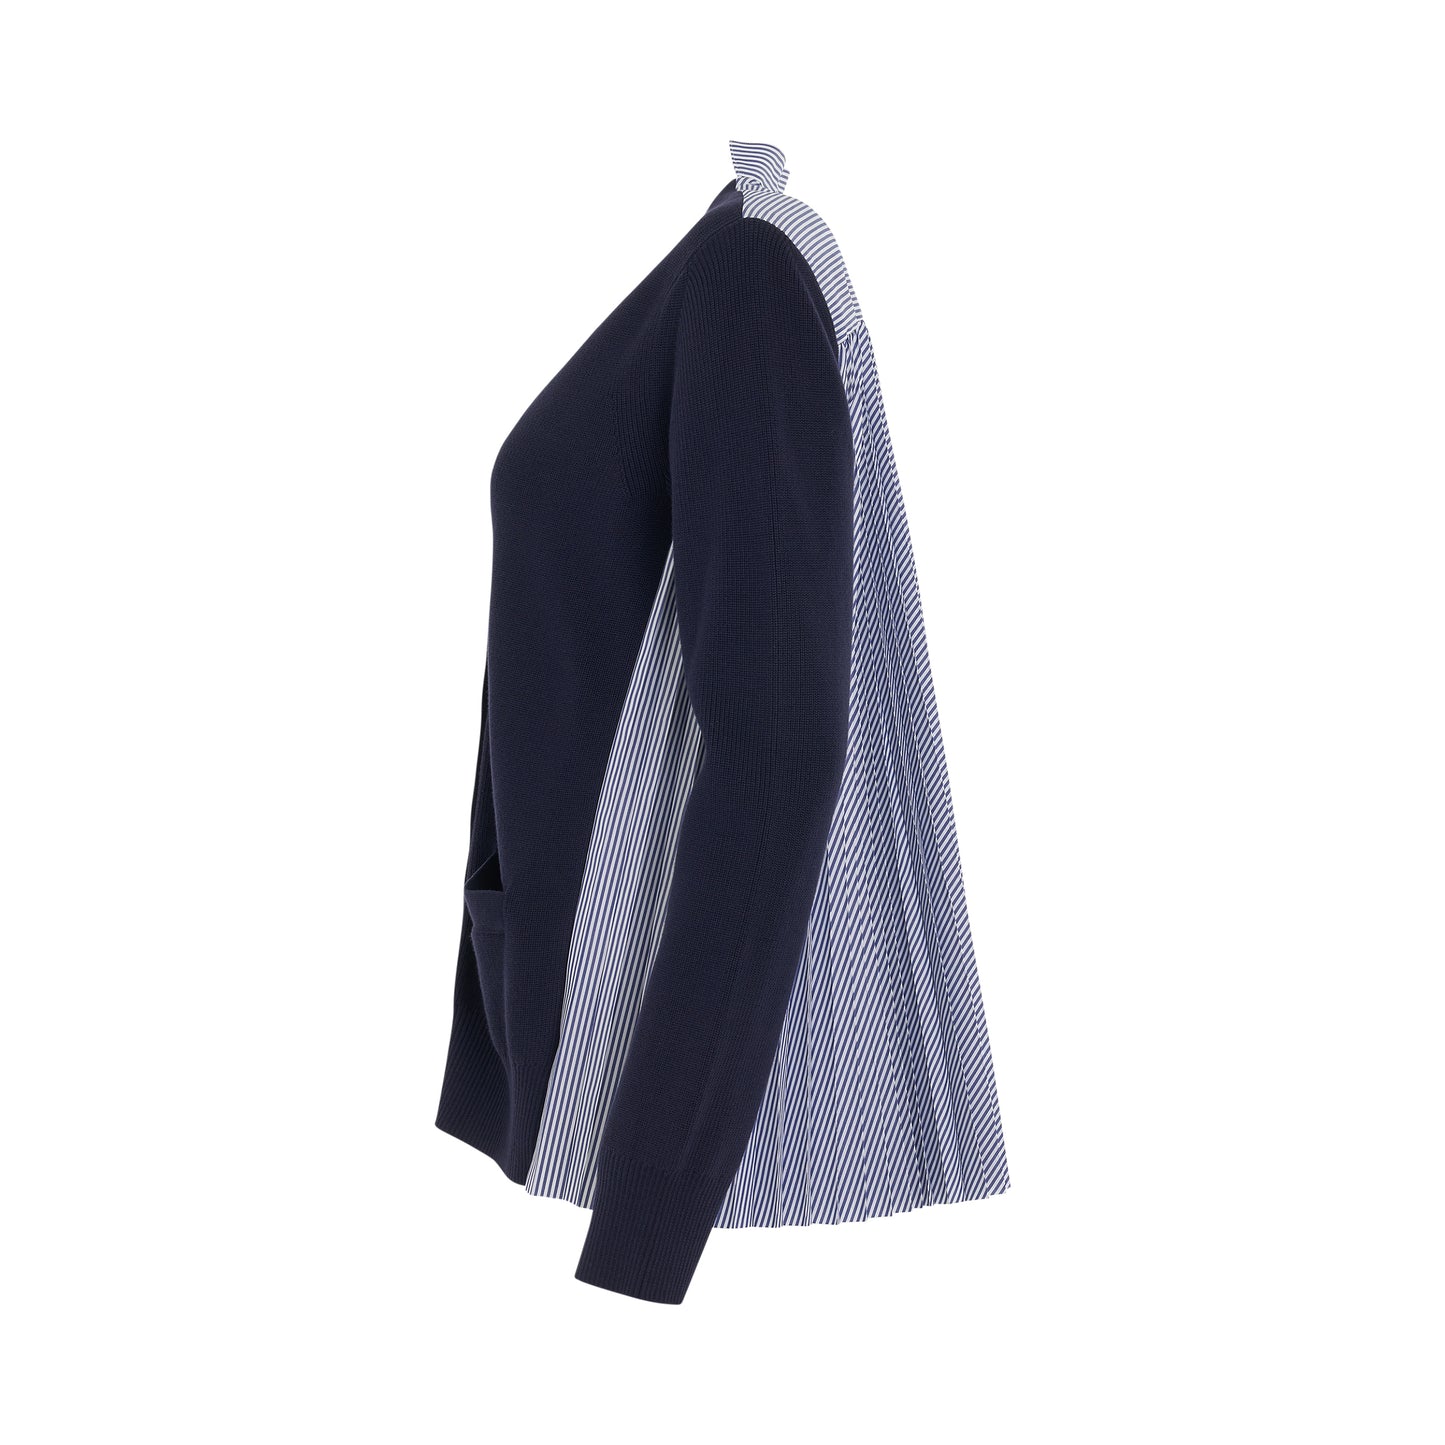 Pleated Panel Cotton Cardigan in Navy/Stripe